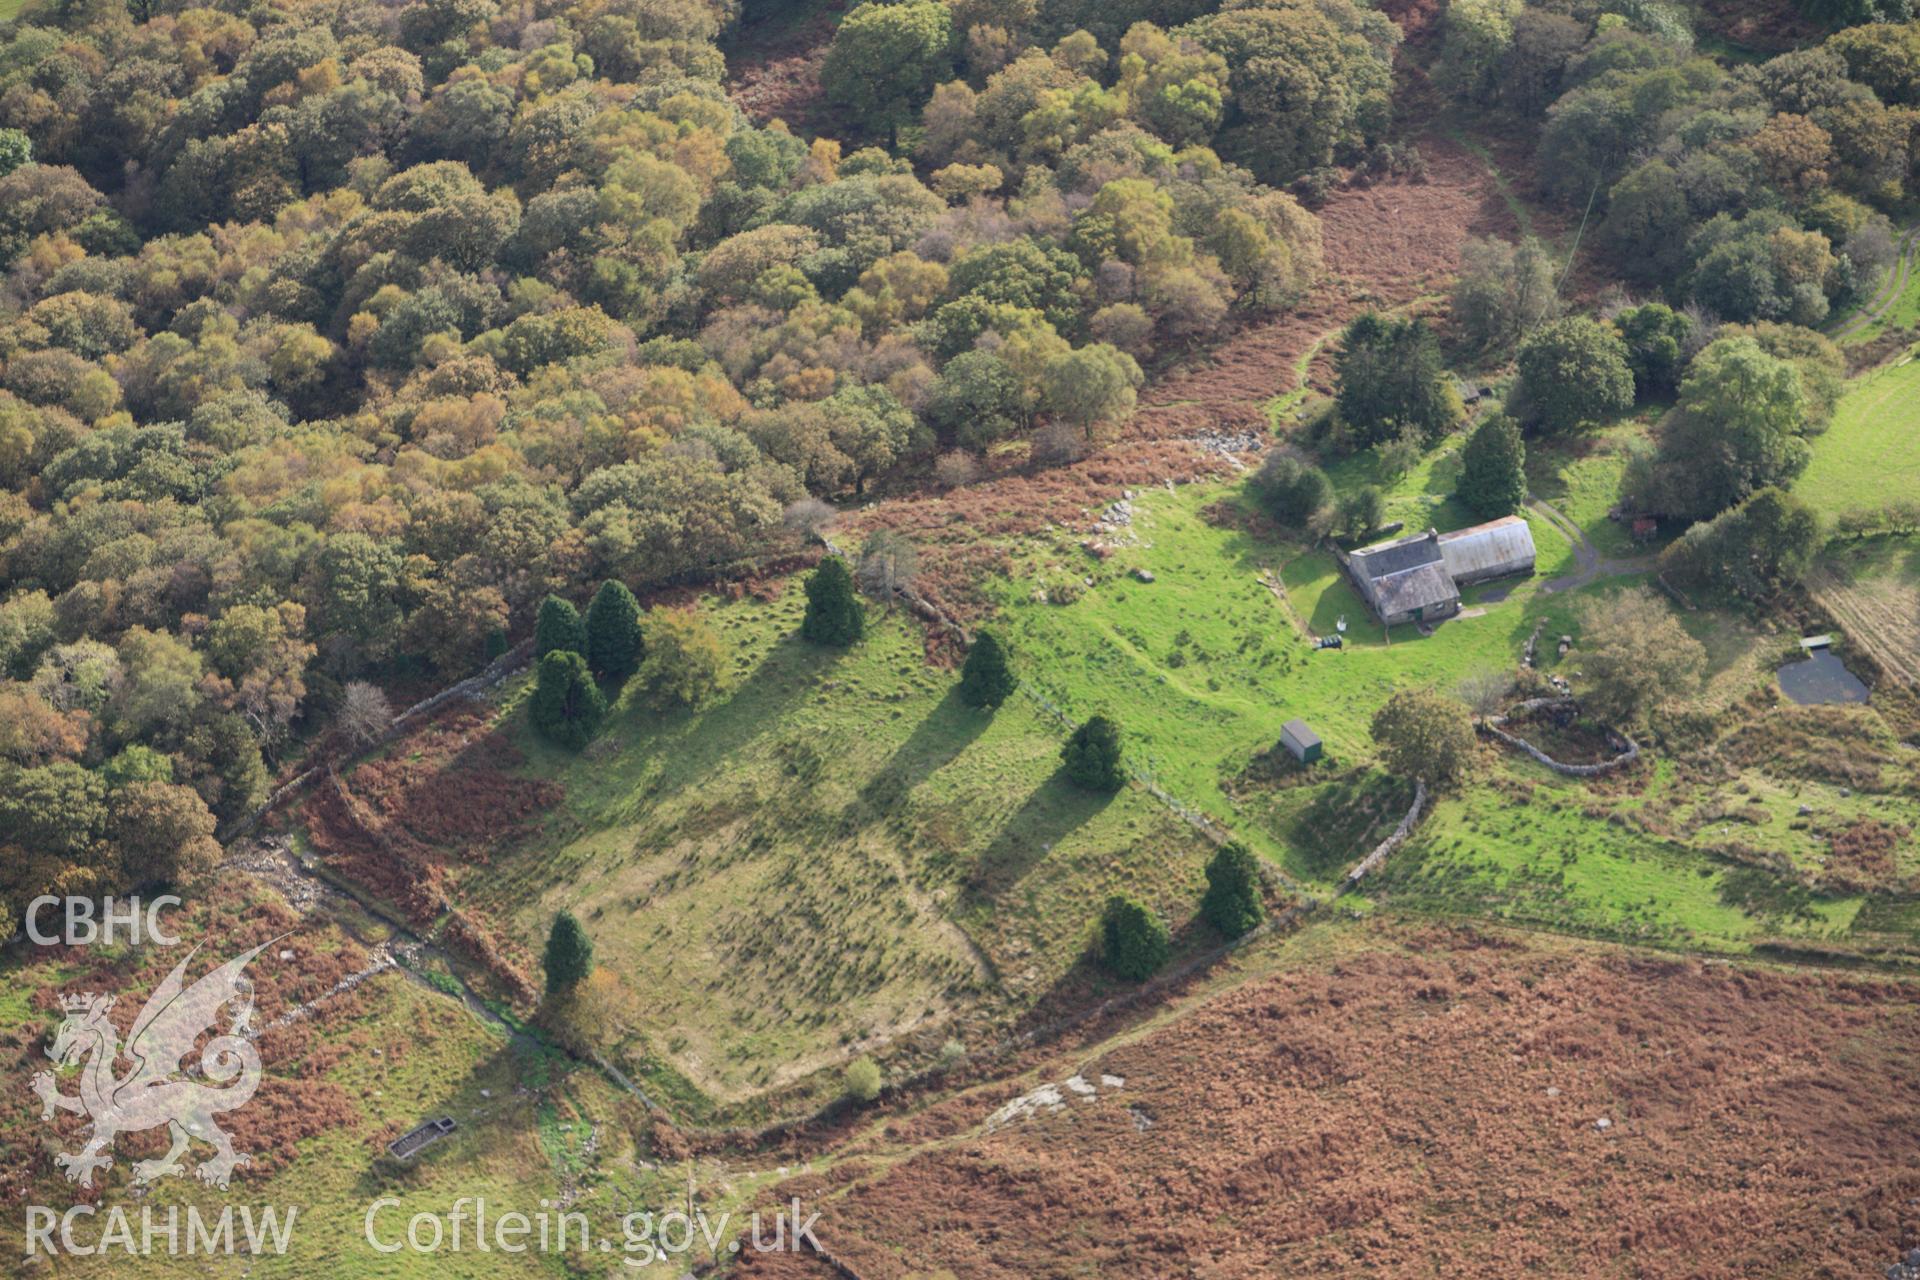 RCAHMW colour oblique aerial photograph of the earthwork enclosure at Garw-Leisiau. Taken on 14 October 2009 by Toby Driver